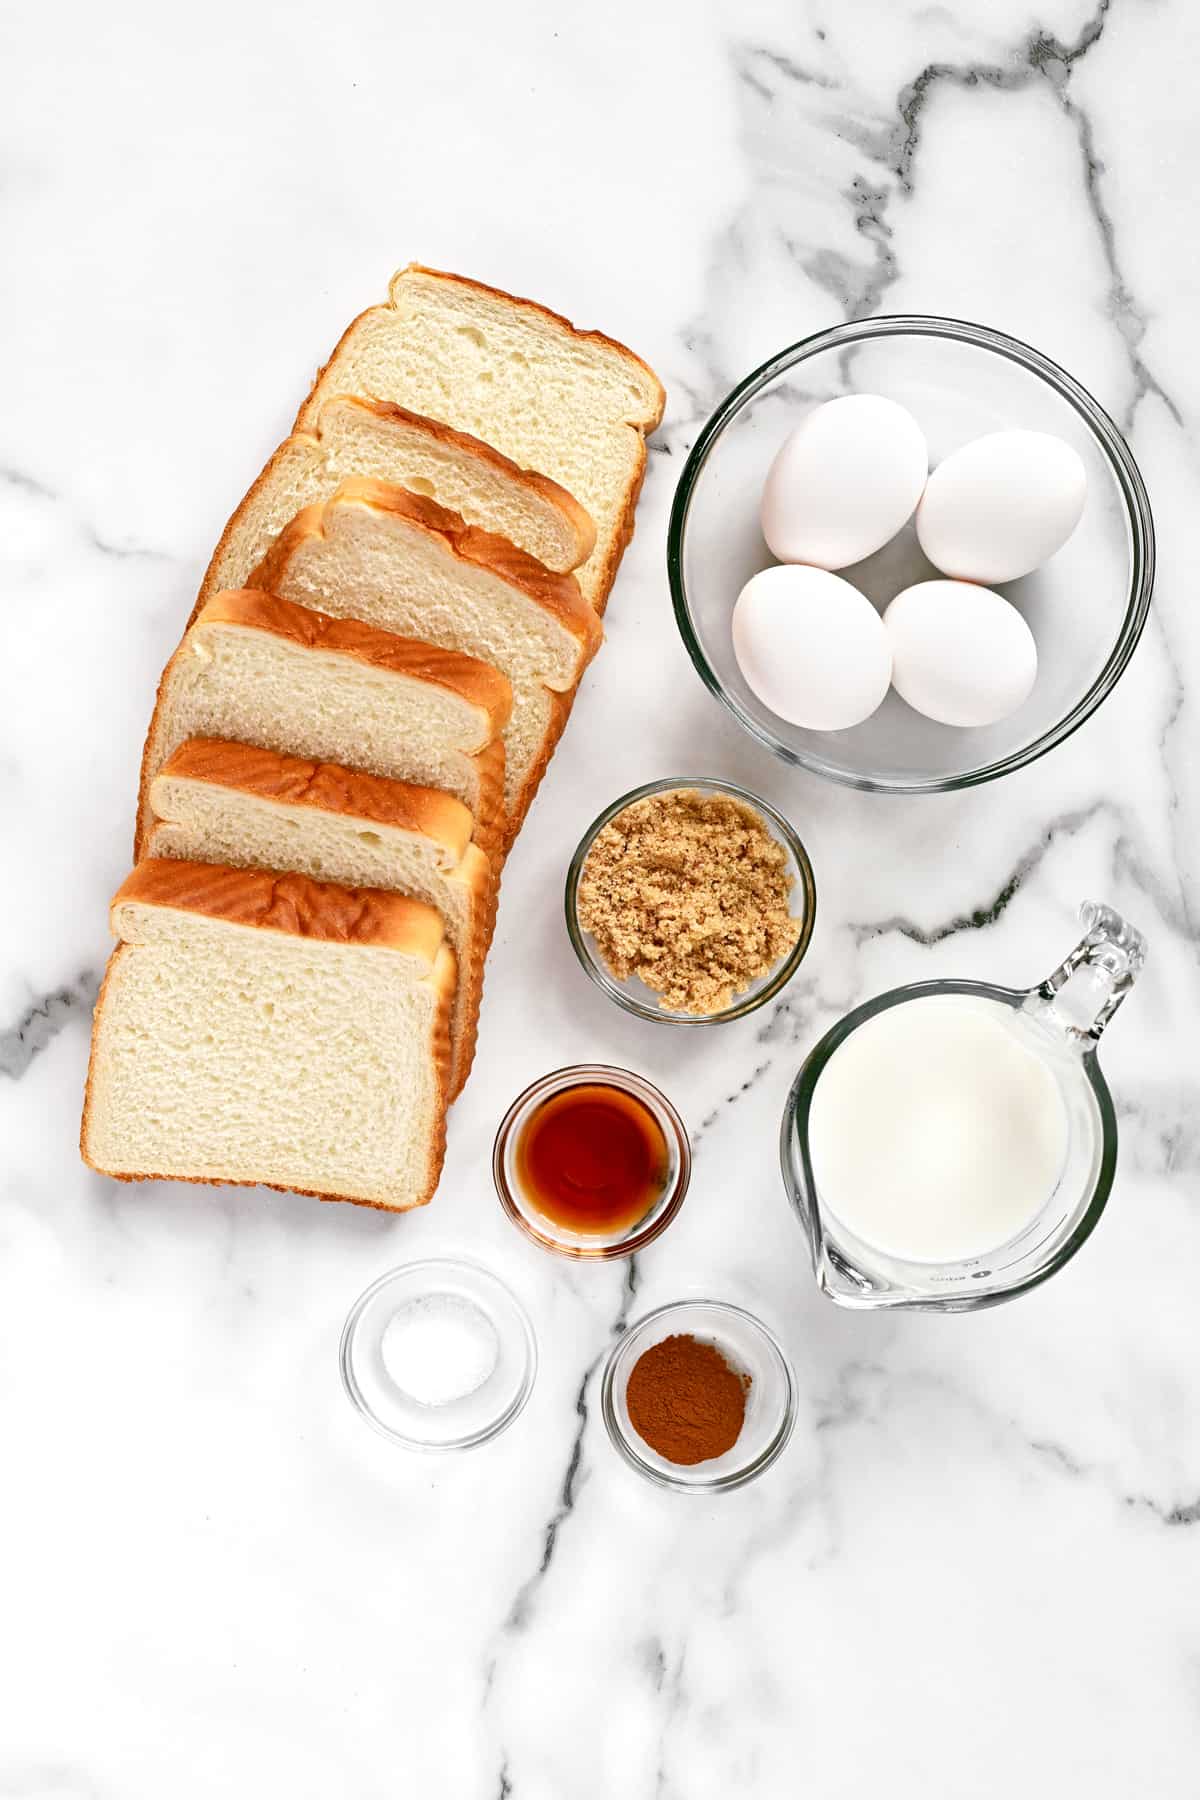 Sliced bread, eggs, and other ingredients on a white marble countertop.